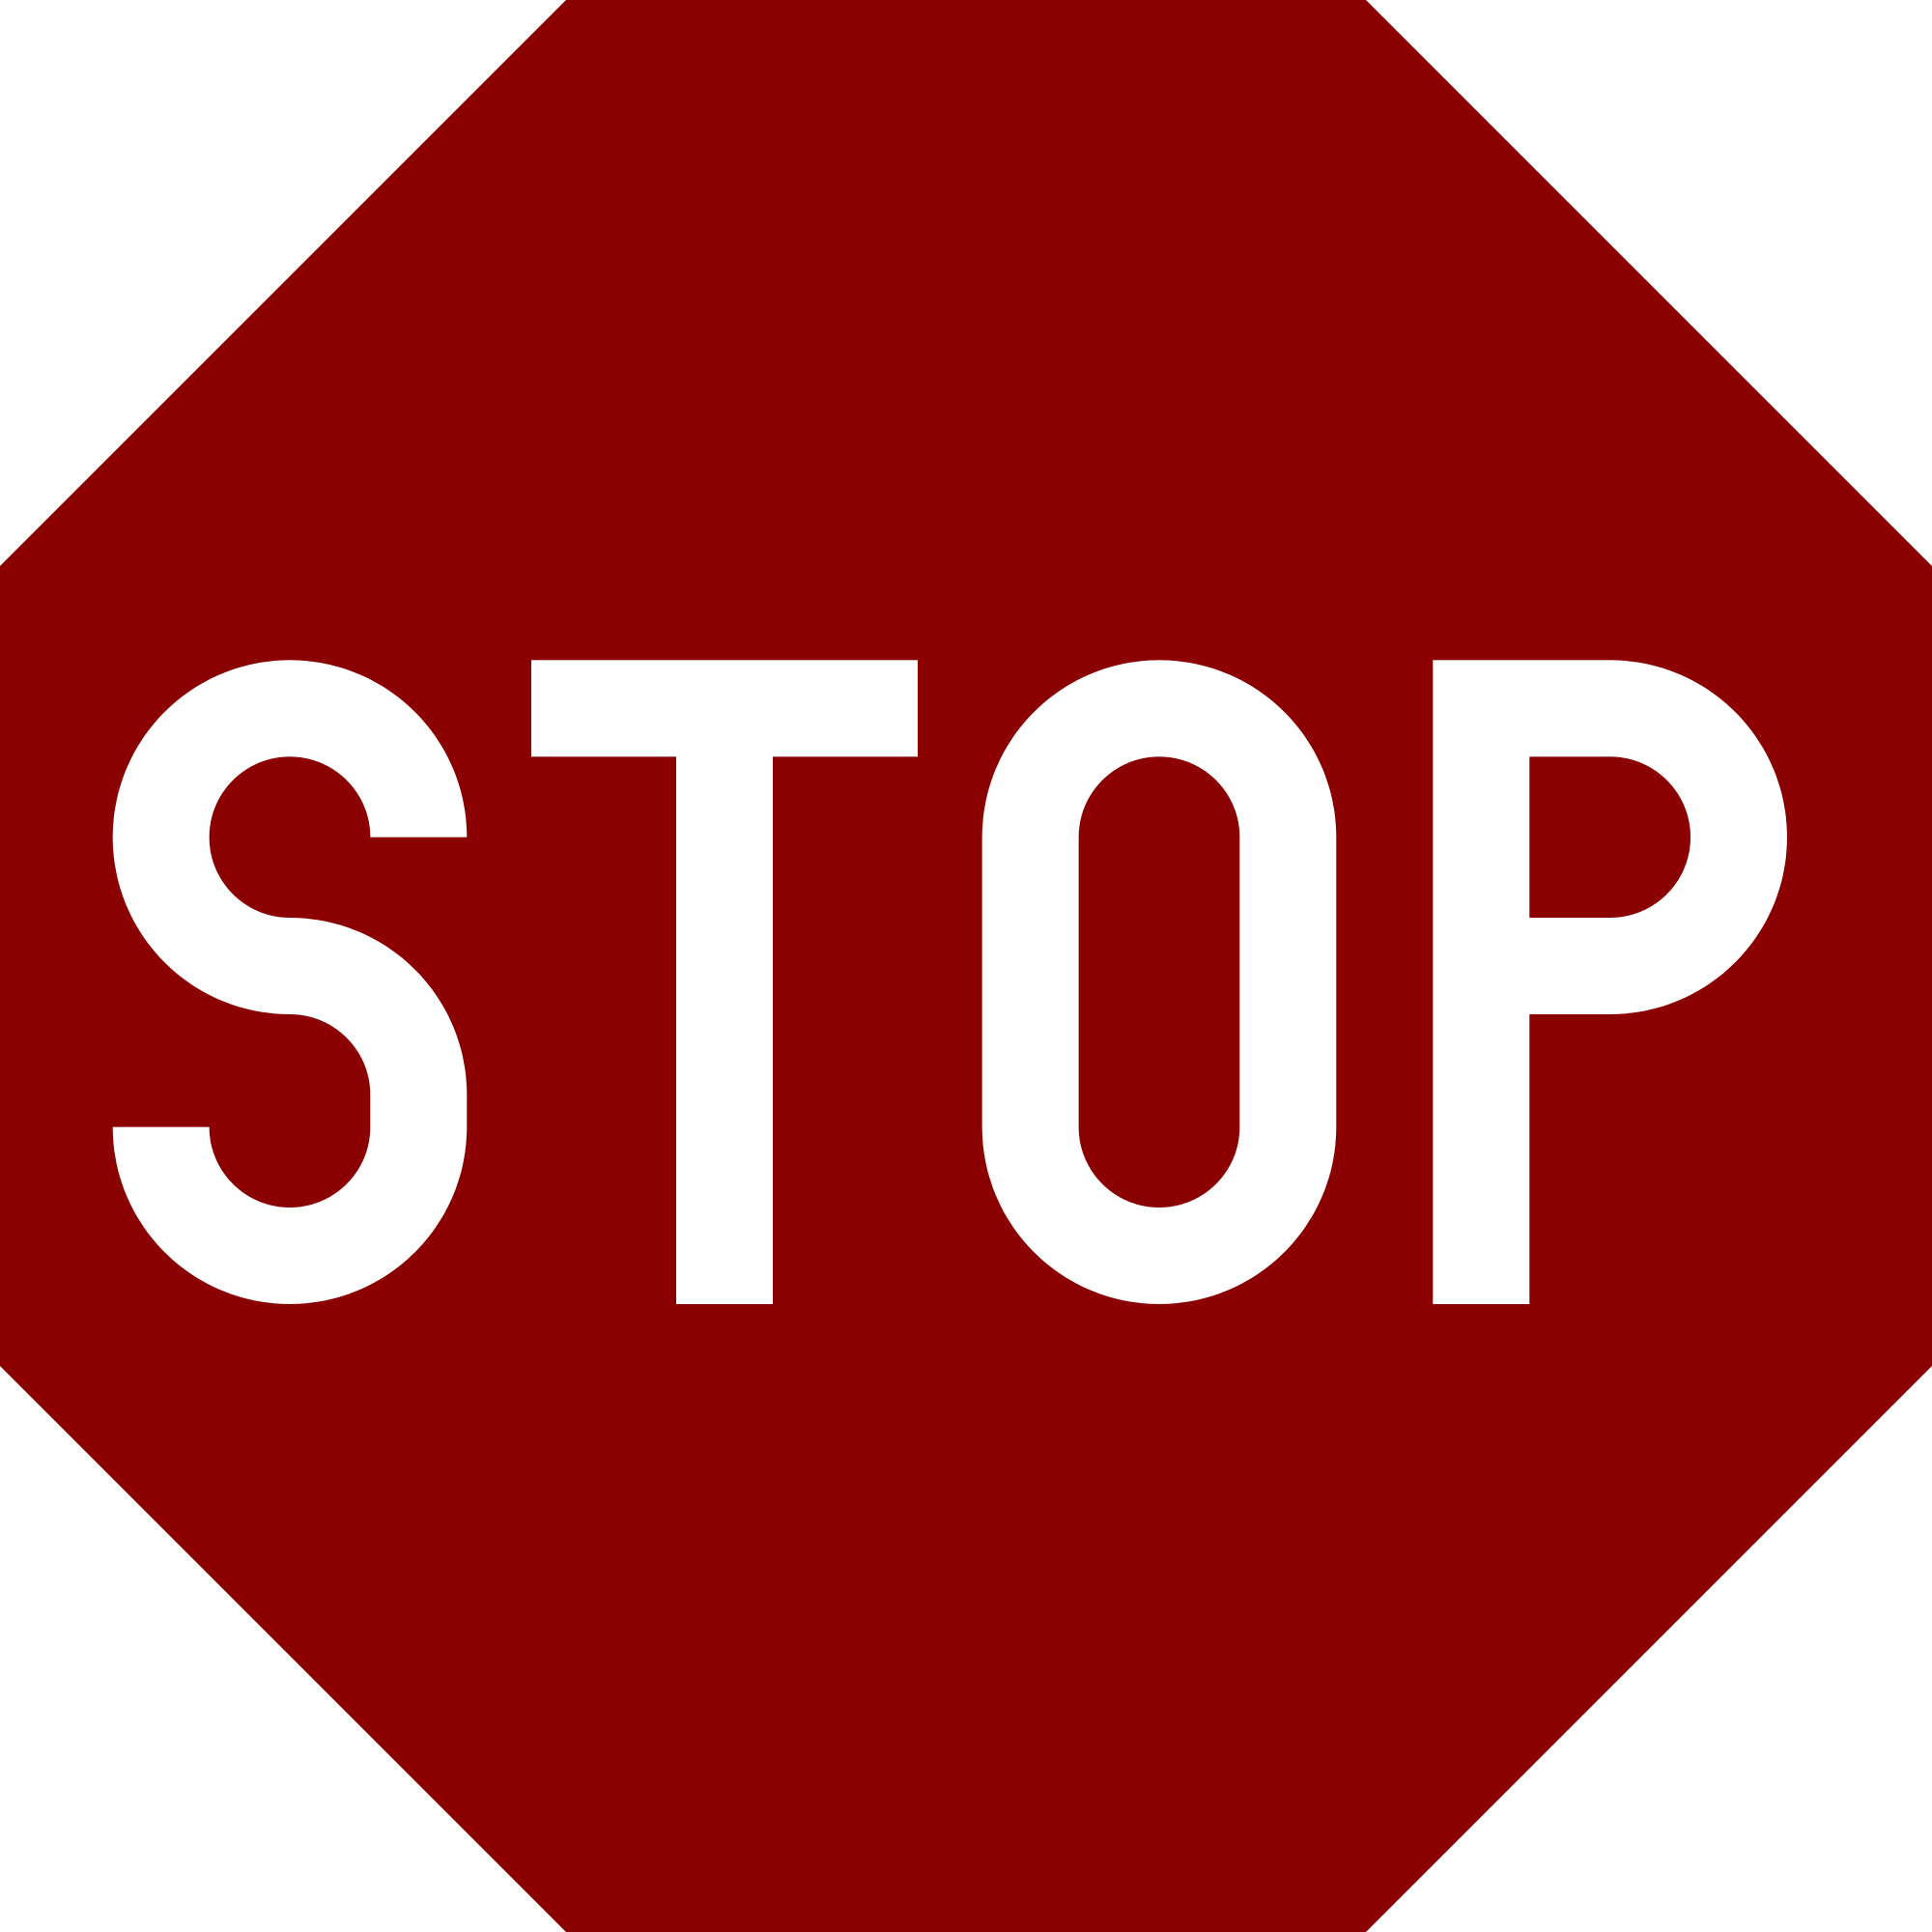 Stop Sign Graphic - Stop Signs Without White Borders (2000x2000)